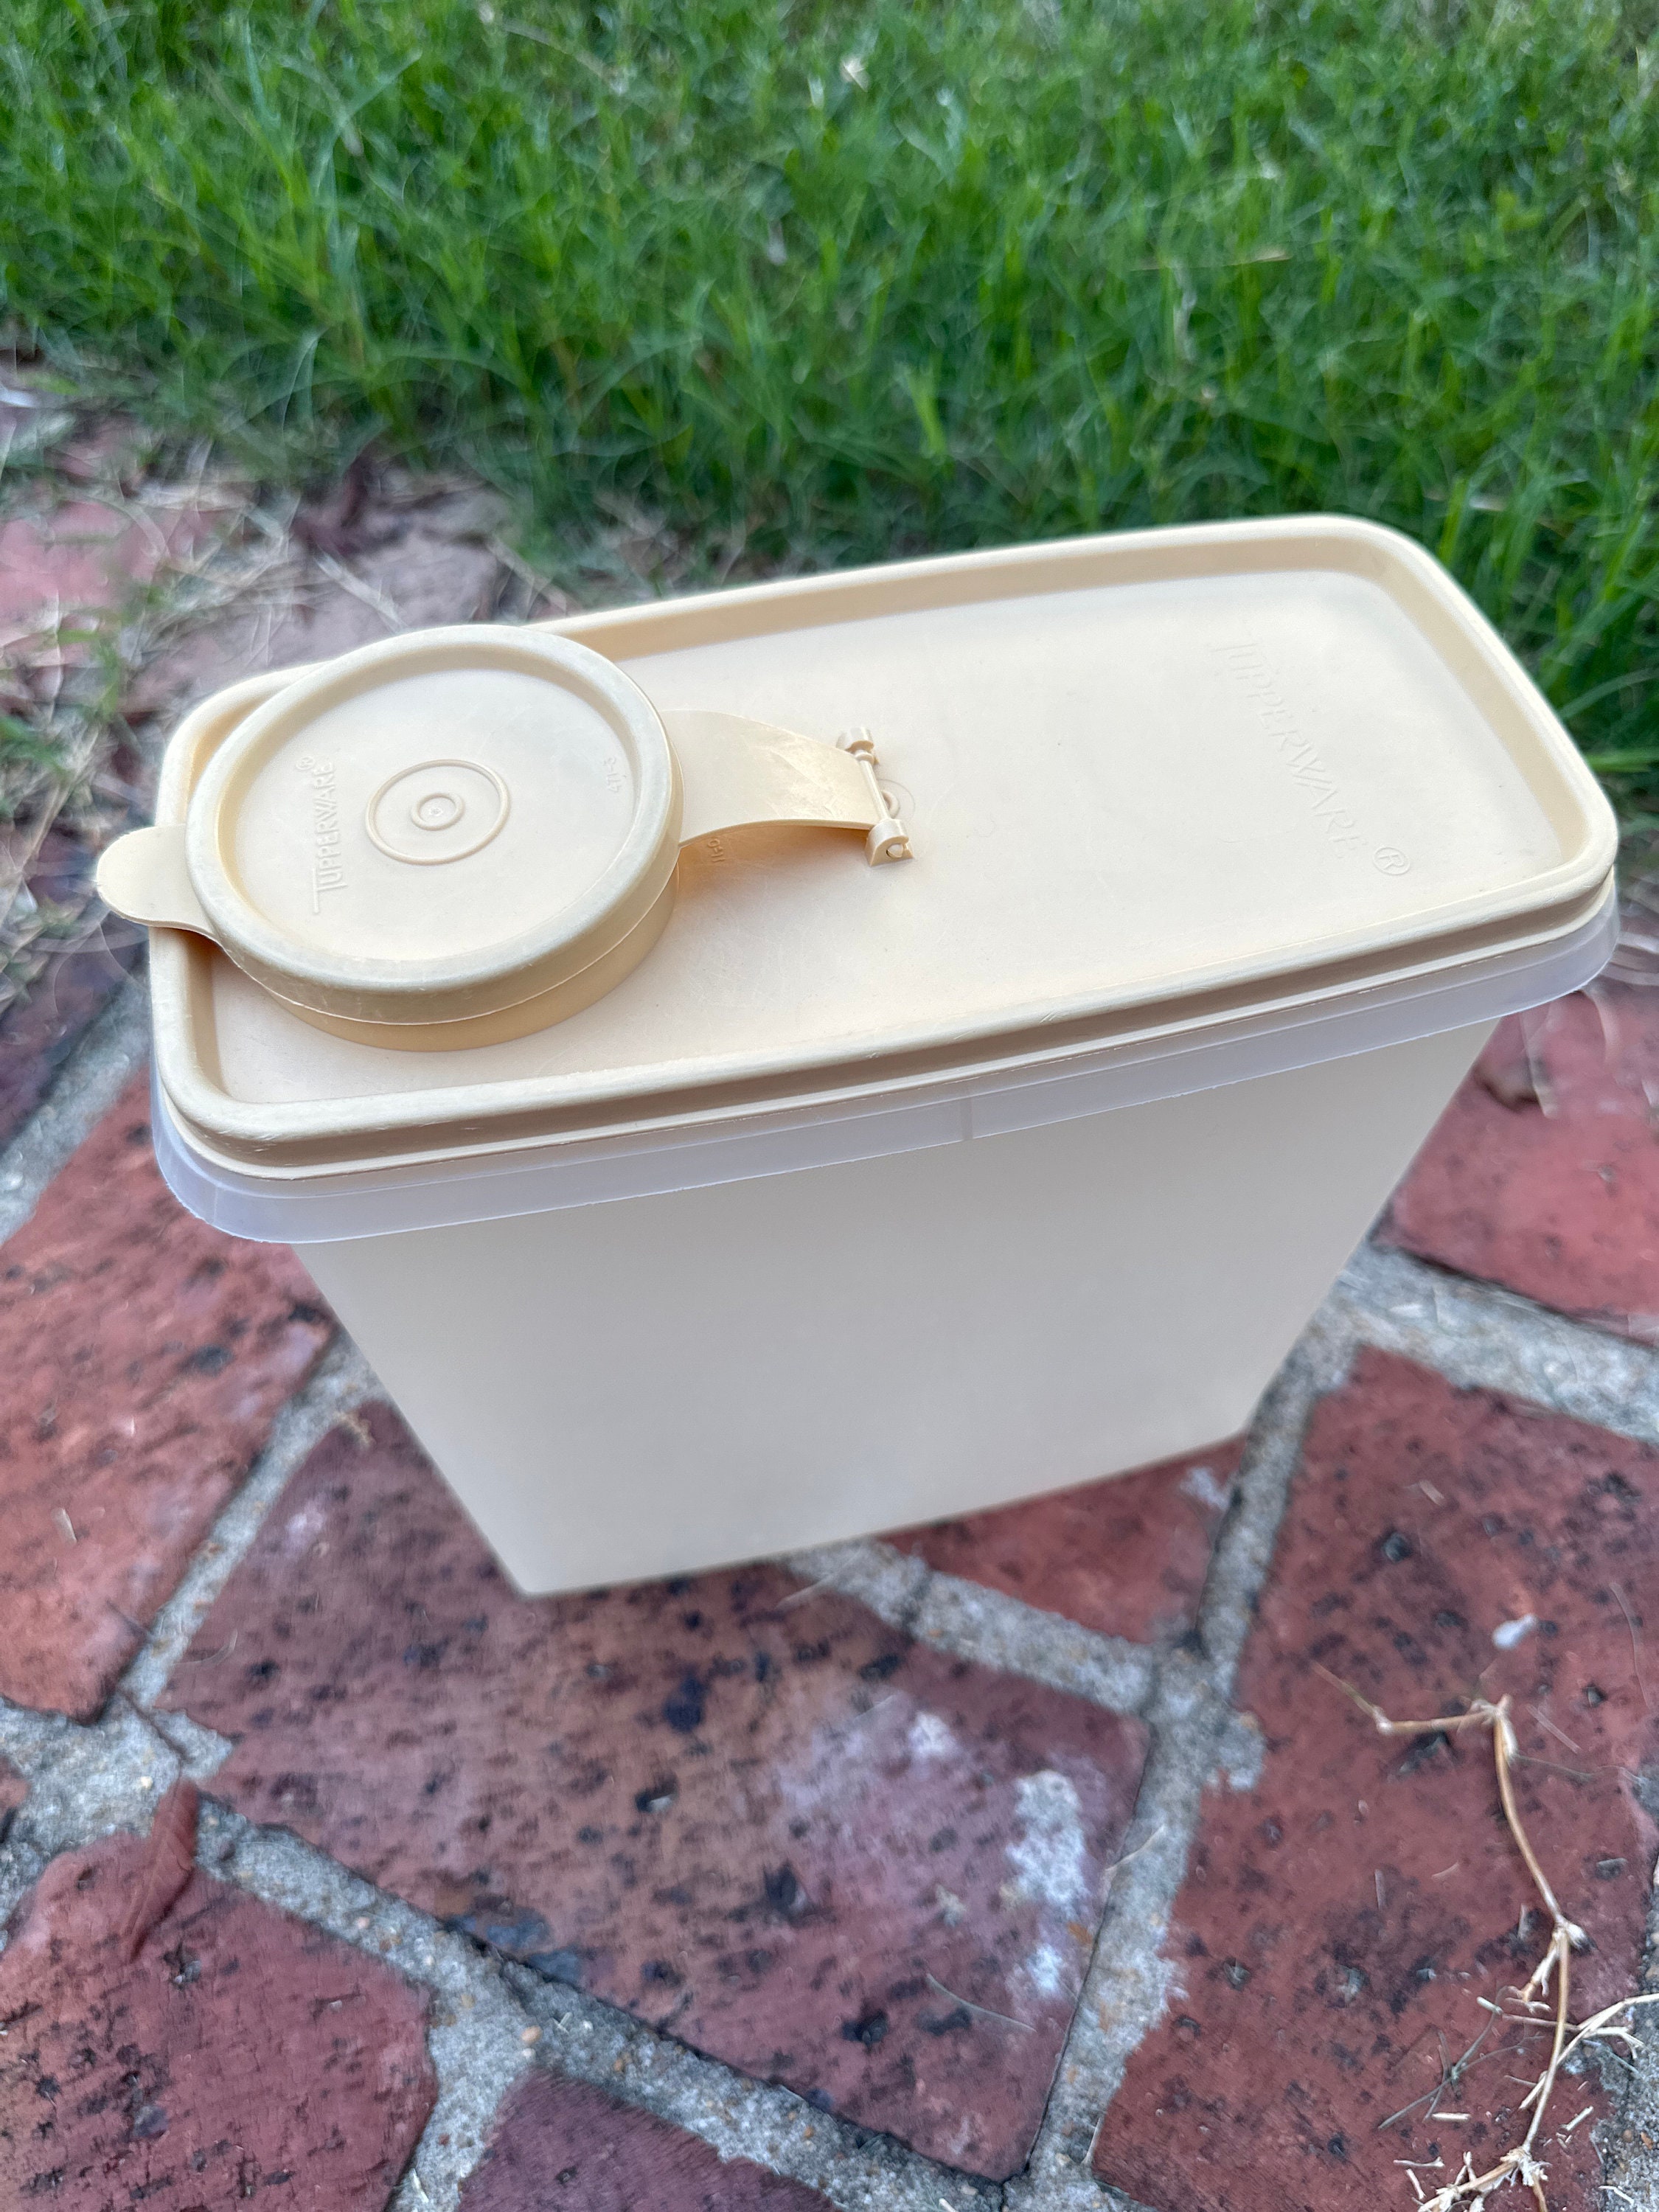 VTG Tupperware Cereal Storage Container #469-5 With Lid